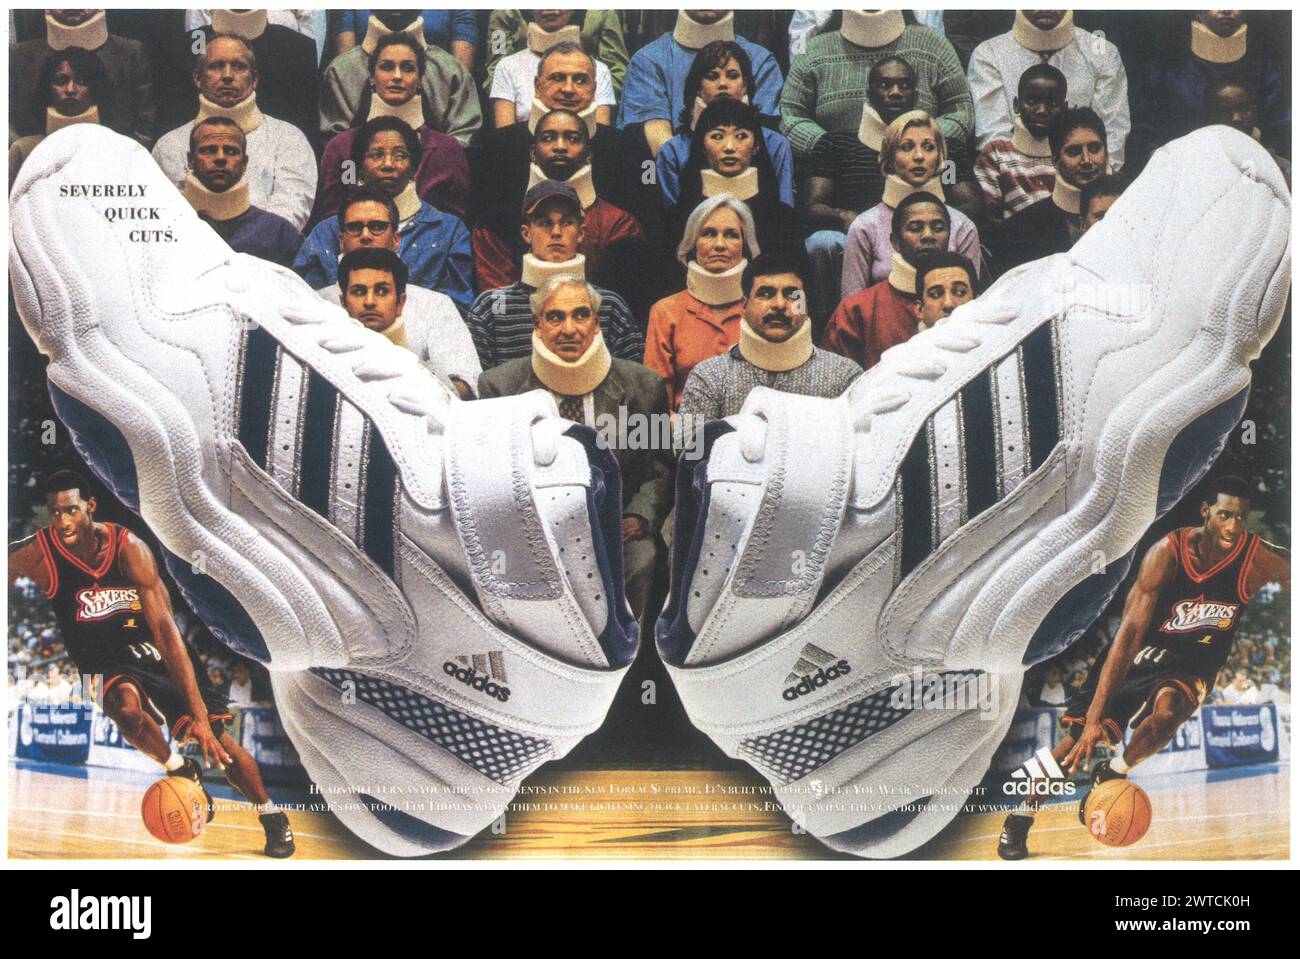 1998 Adidas Chaussures annonce avec Tim Thomas Sixers Basketball Banque D'Images